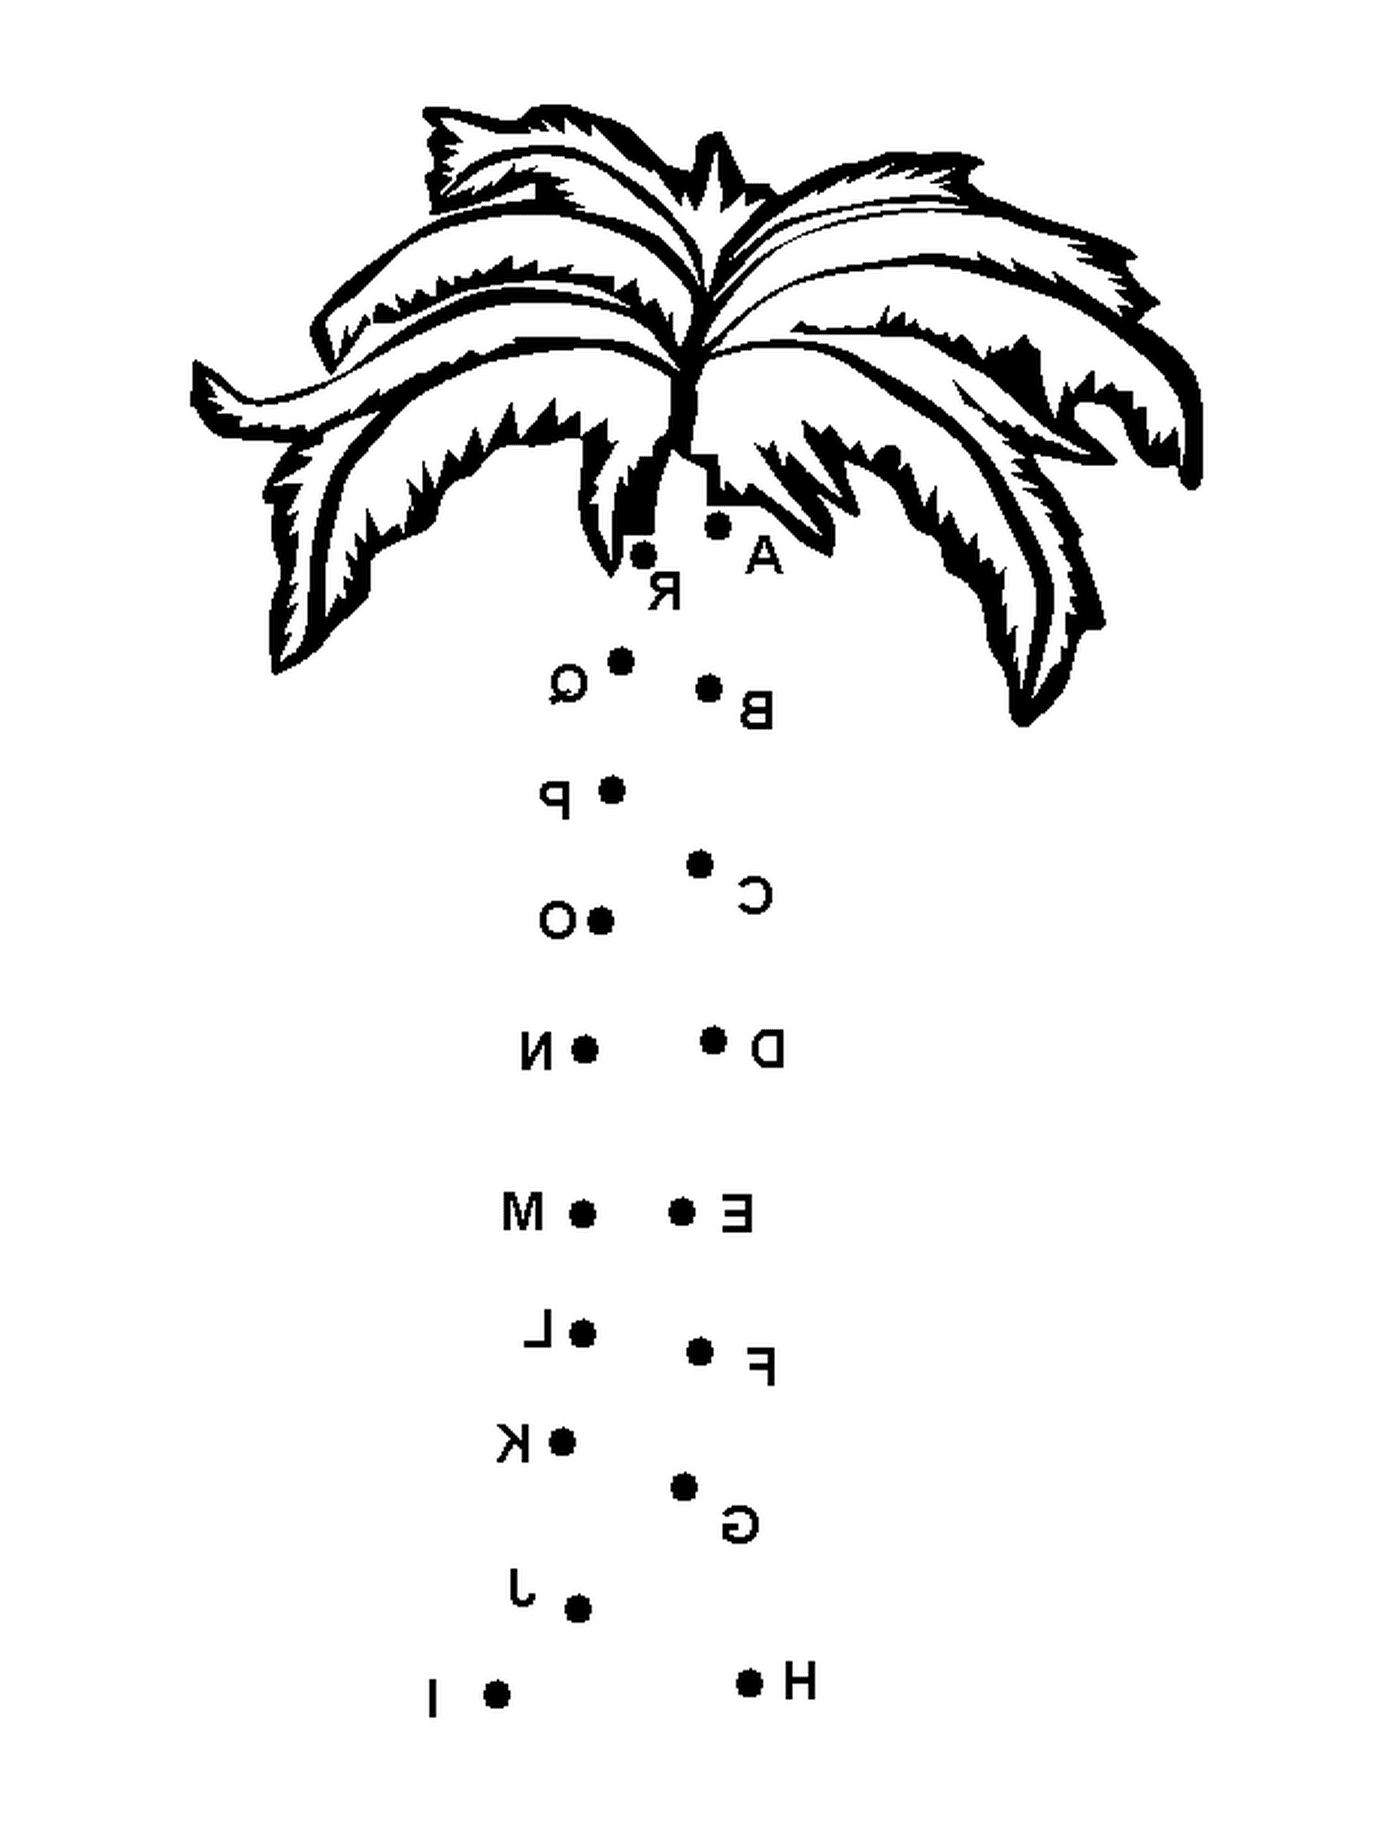  Island palm tree with letters 